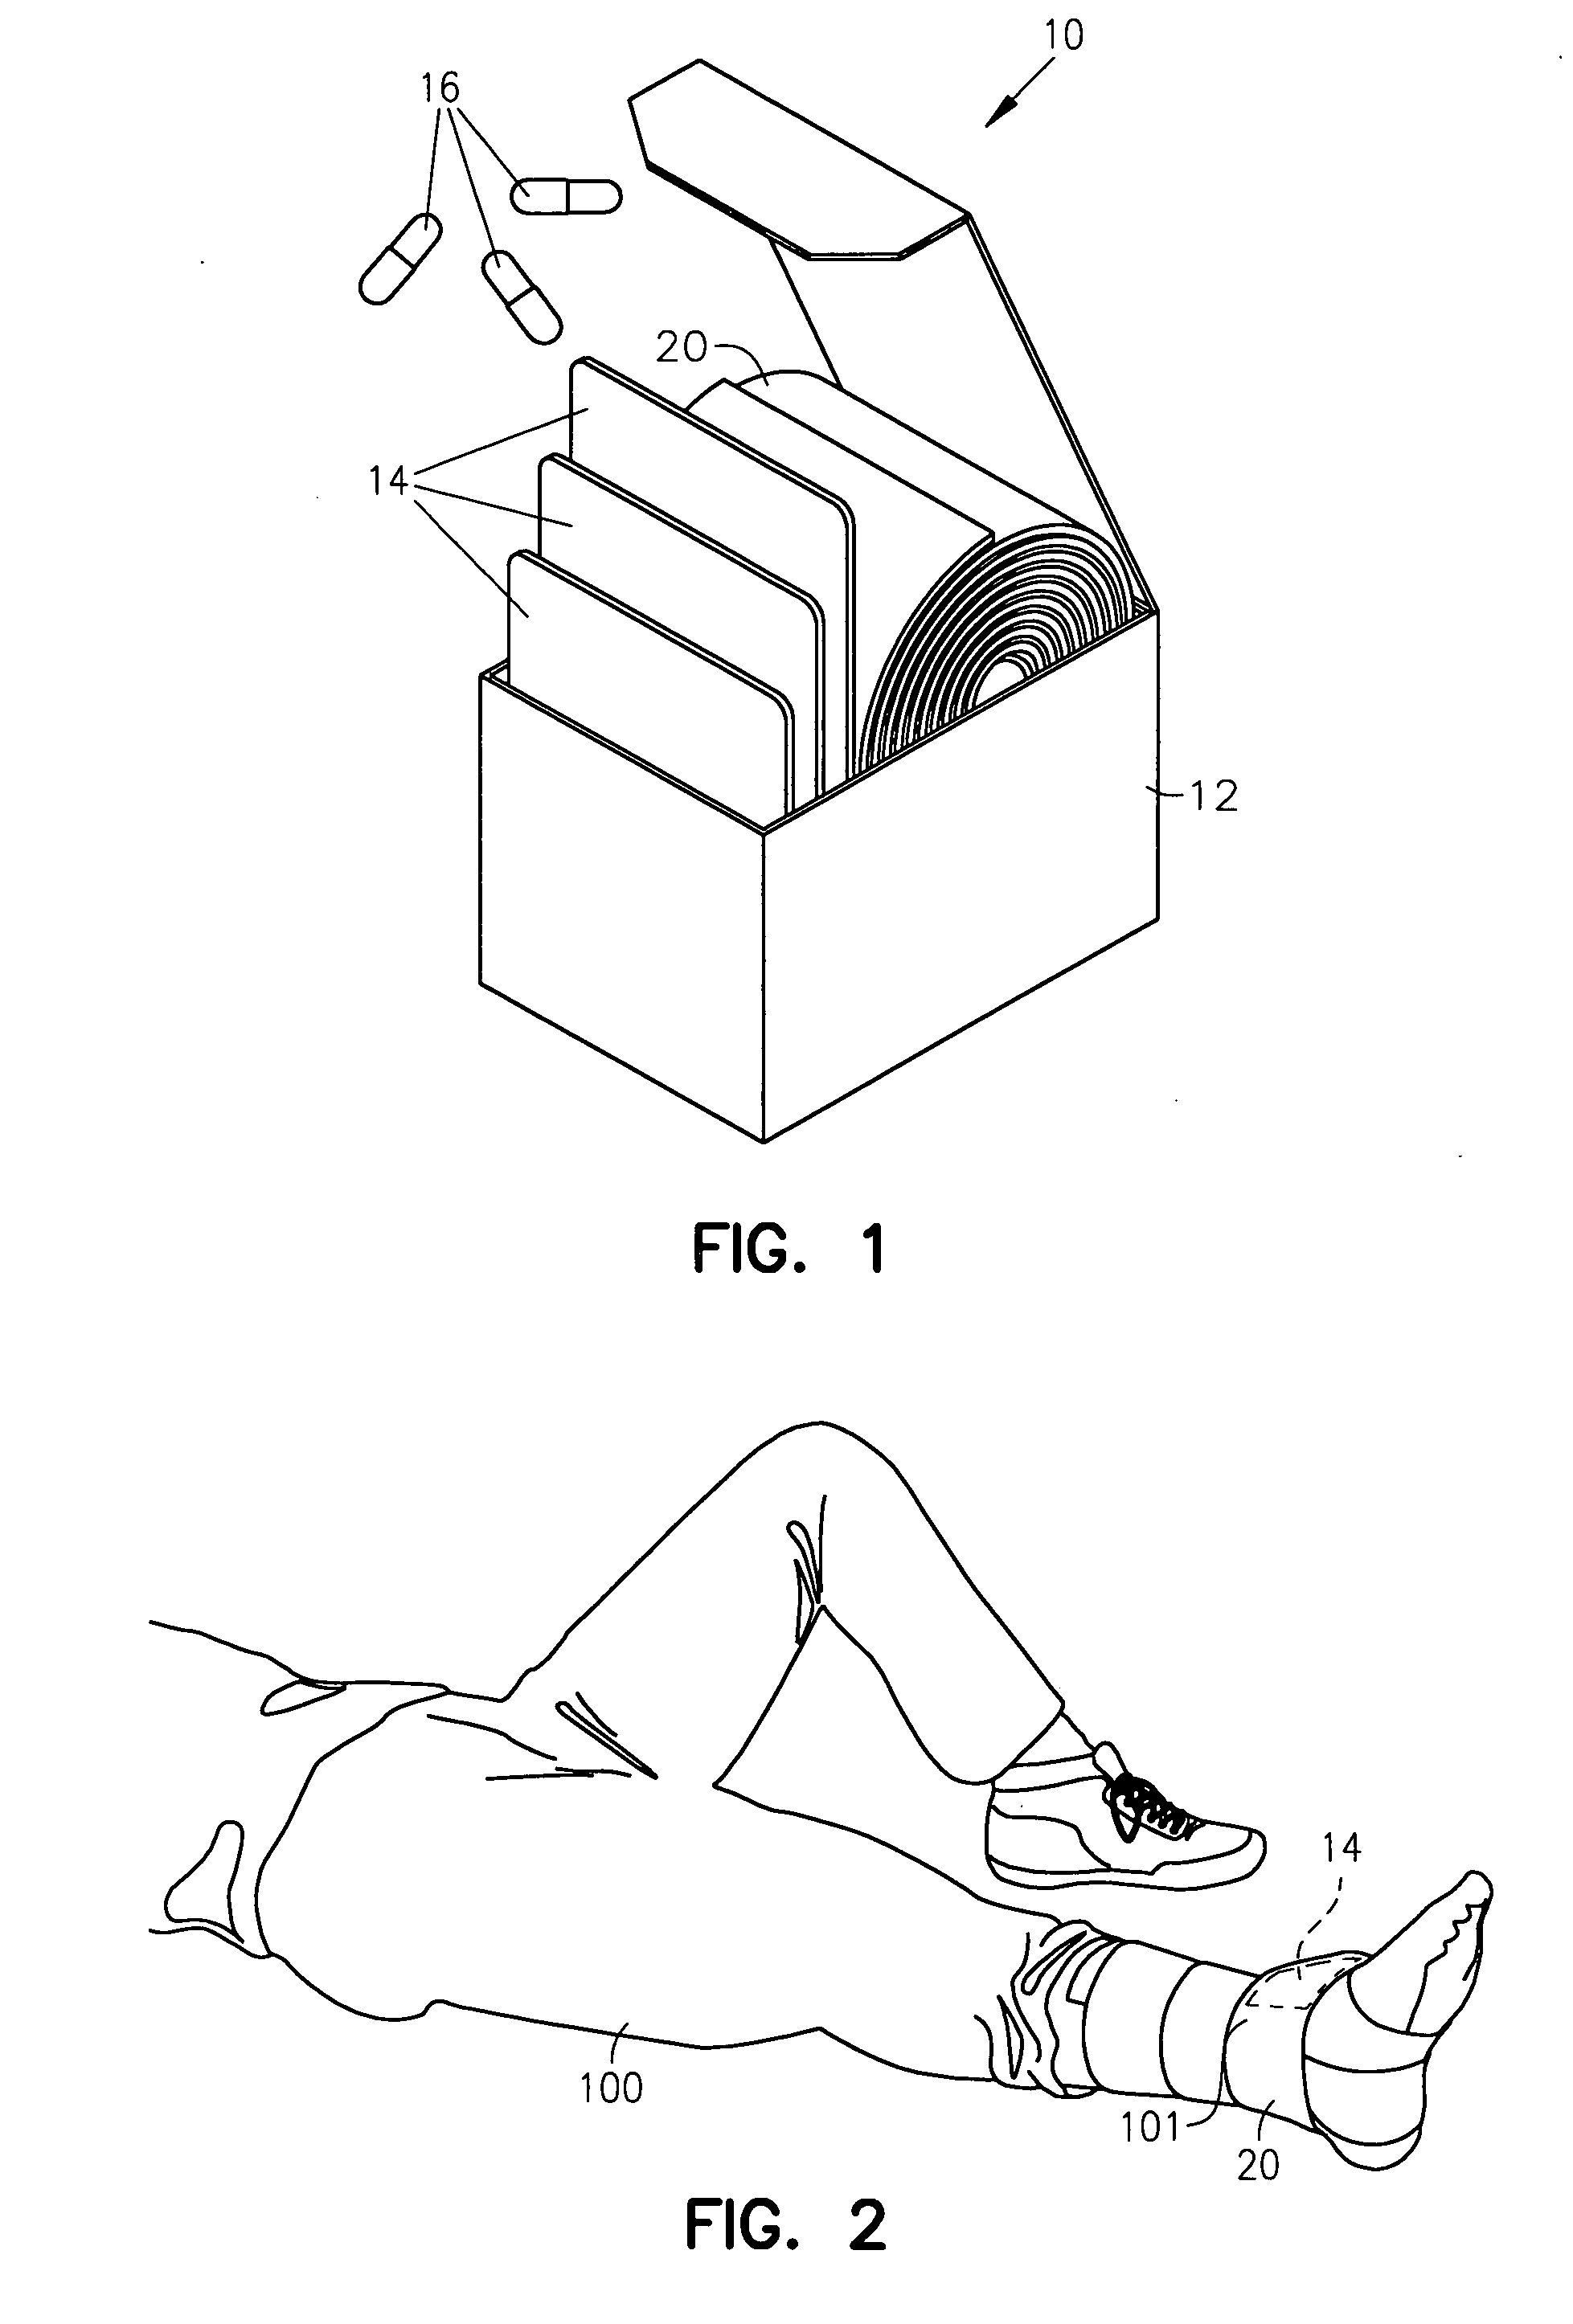 System for providing therapy to a body